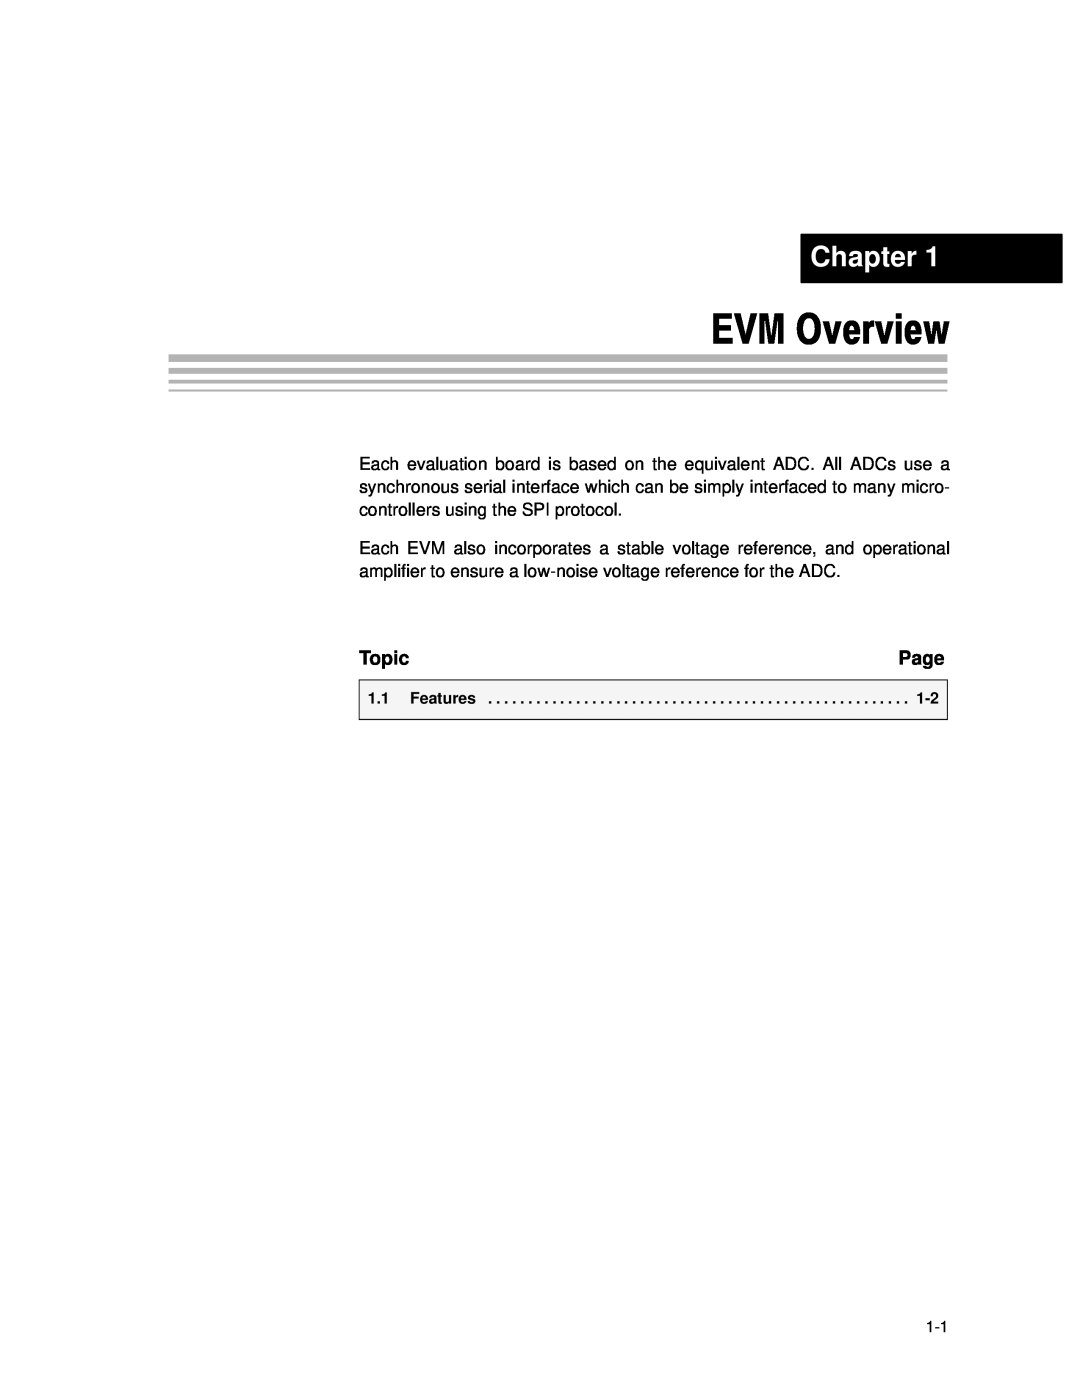 Texas Instruments TLC3578EVM manual EVM Overview, Chapter, Topic, Page 